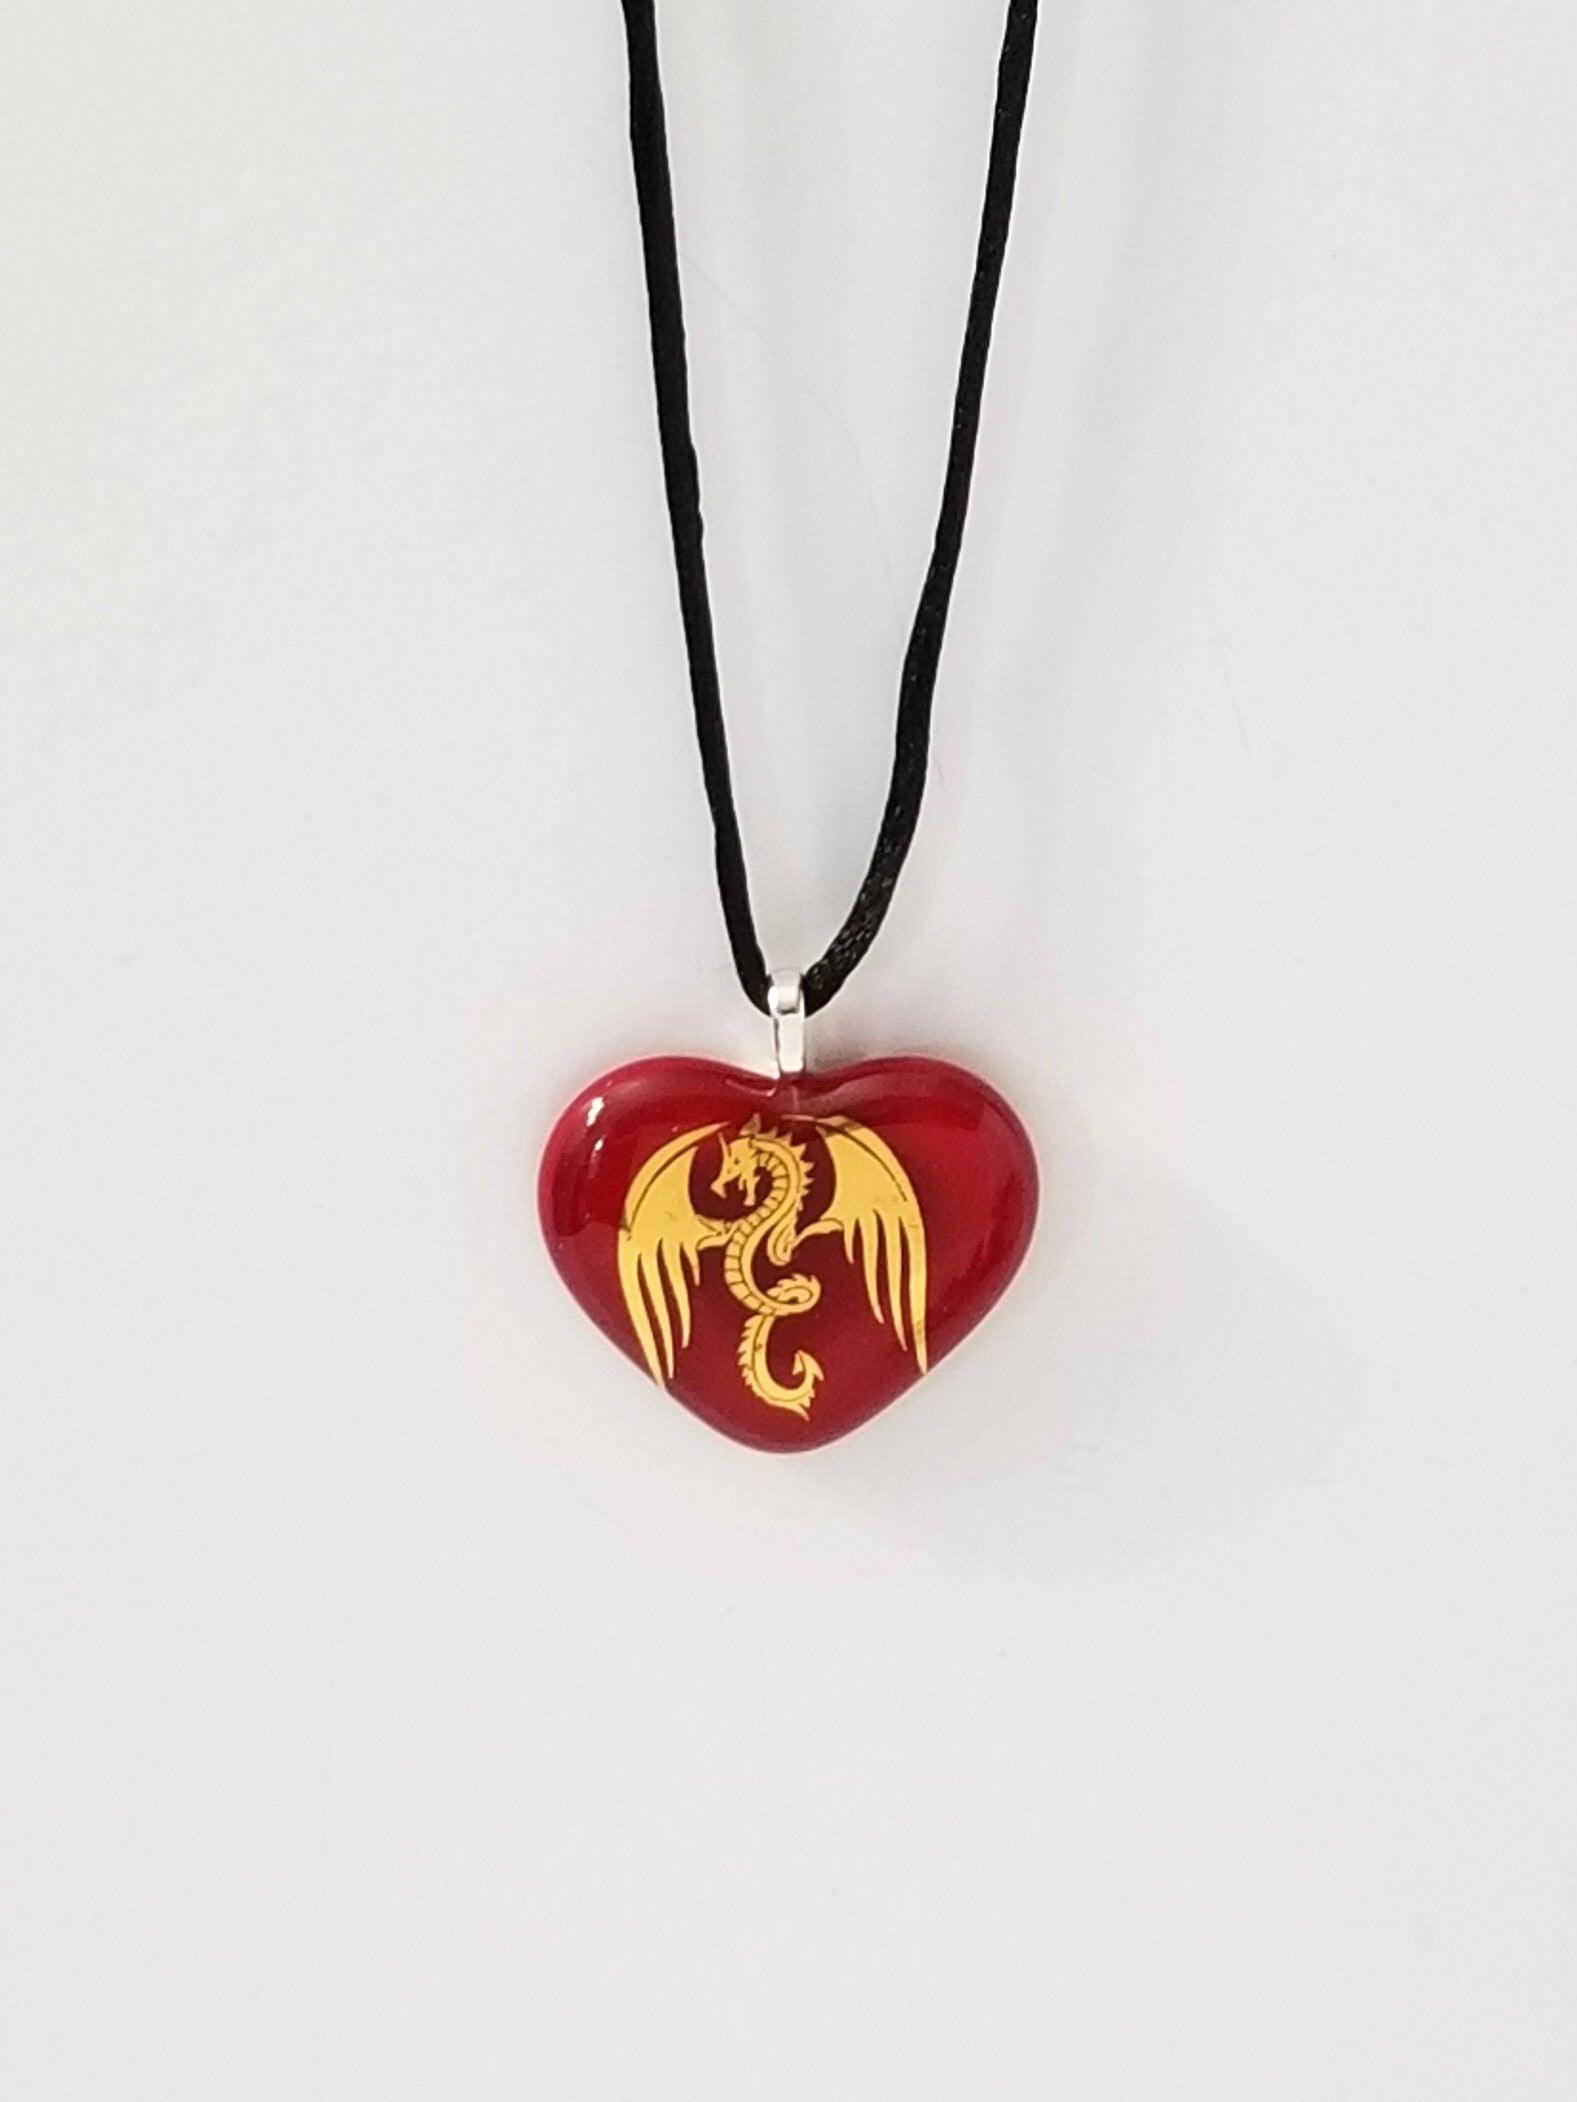 Gold Winged Dragon on Red Heart Fused Glass Pendant from seeds glassworks